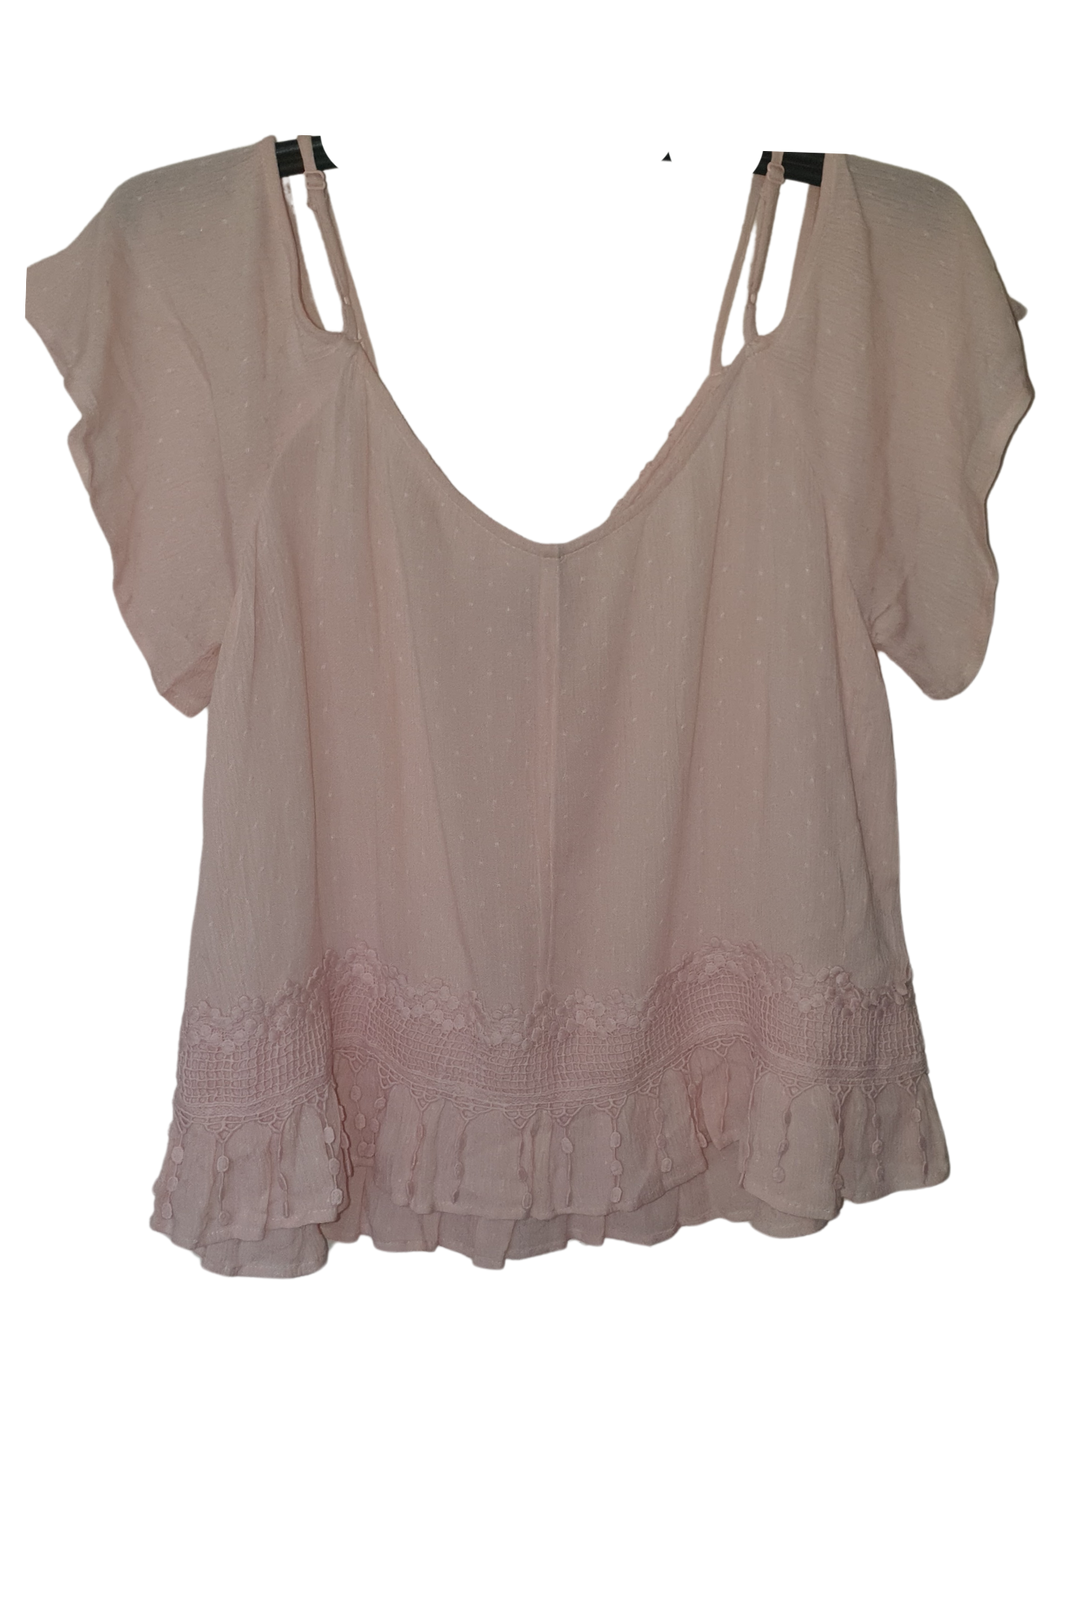 PINK SOFT WITH LACE DETAIL TOP